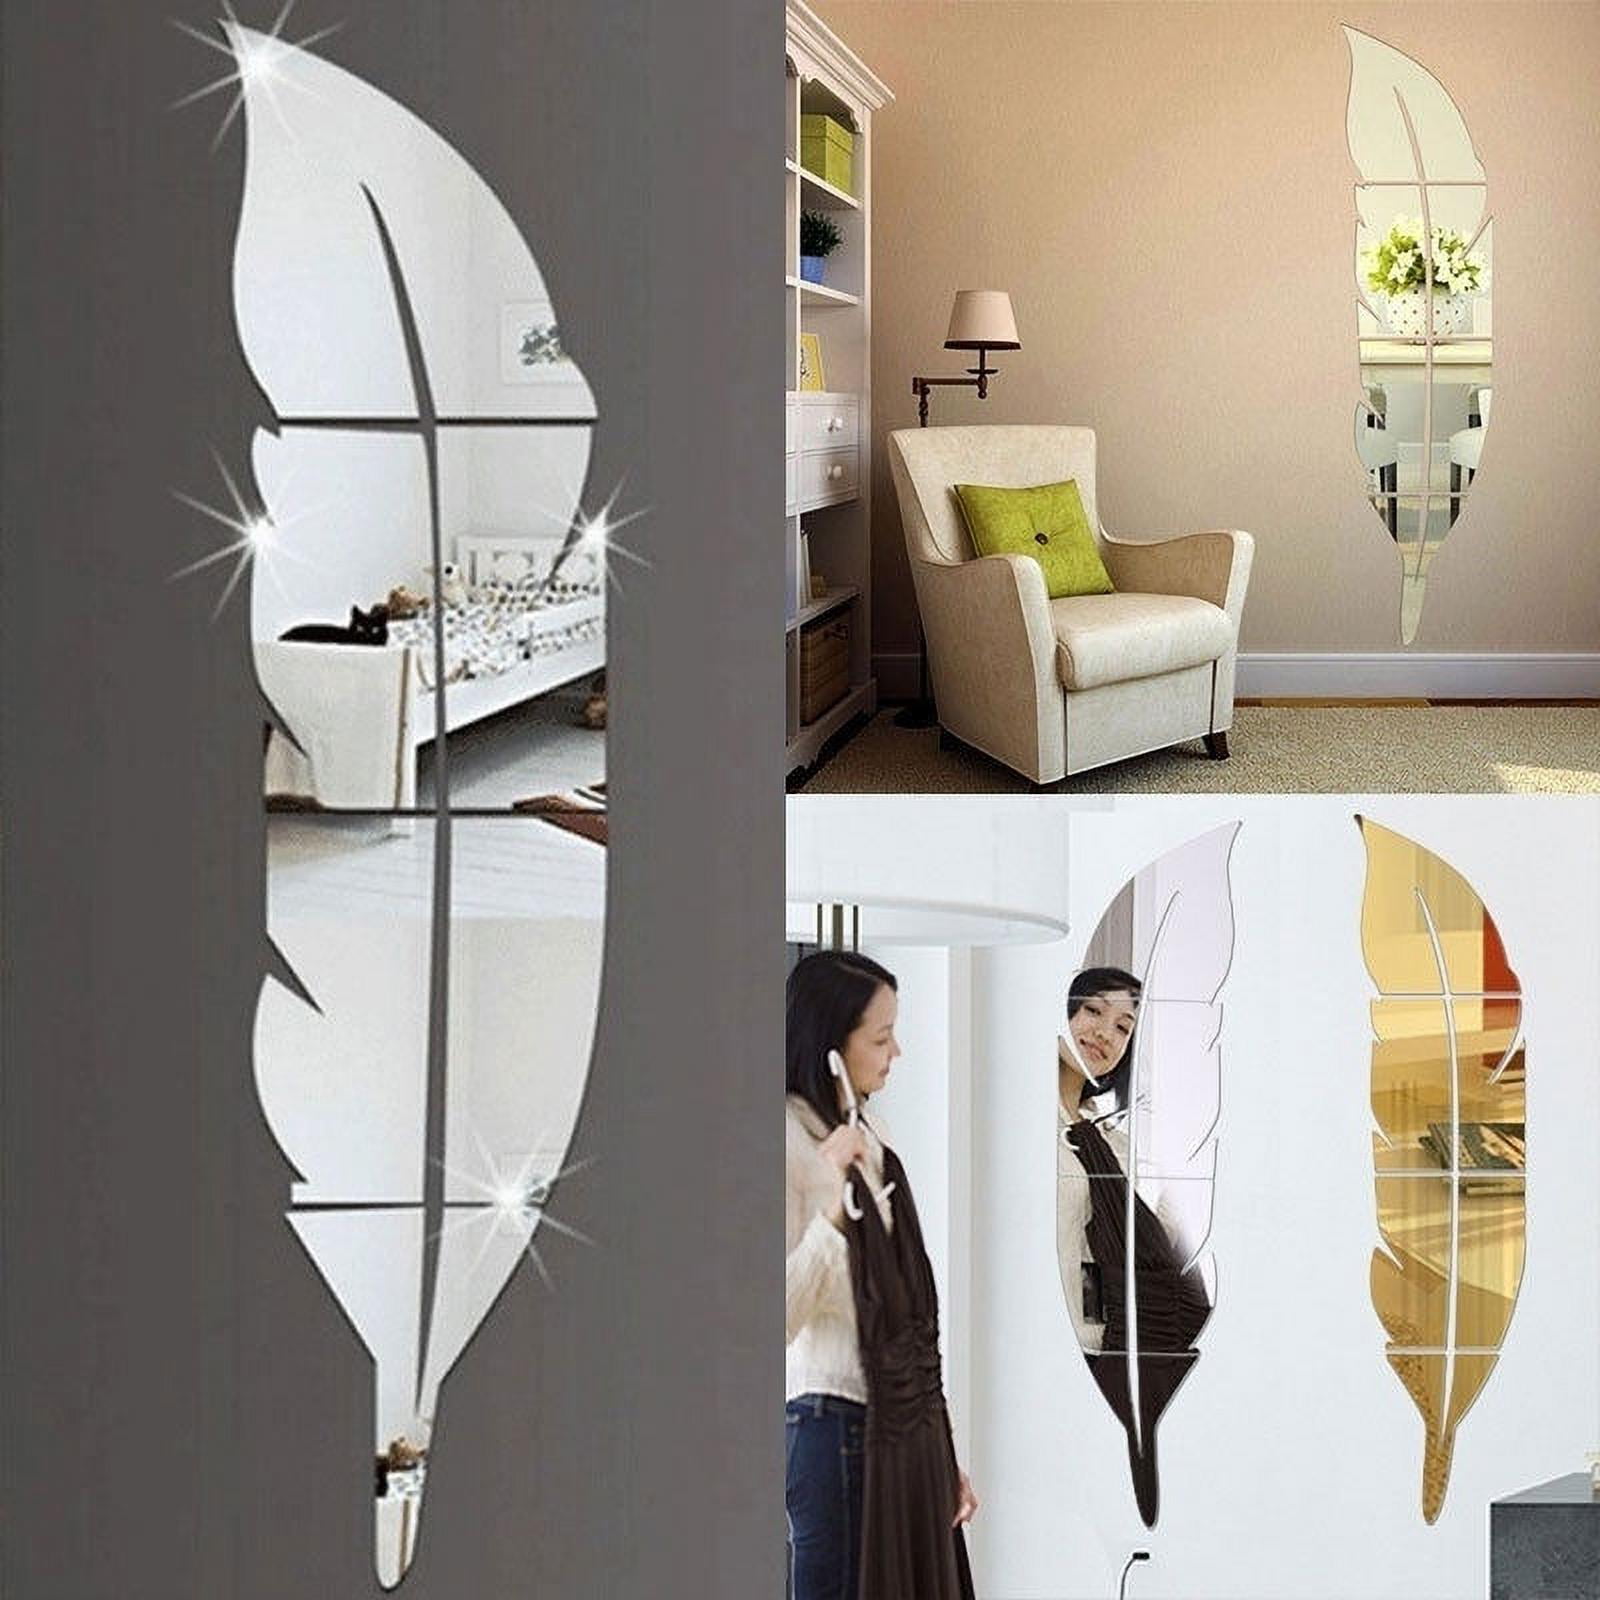 Feather Mirror Tiles Wall Sticker Self Adhesive Stick On Art Home Room Decal UK! 